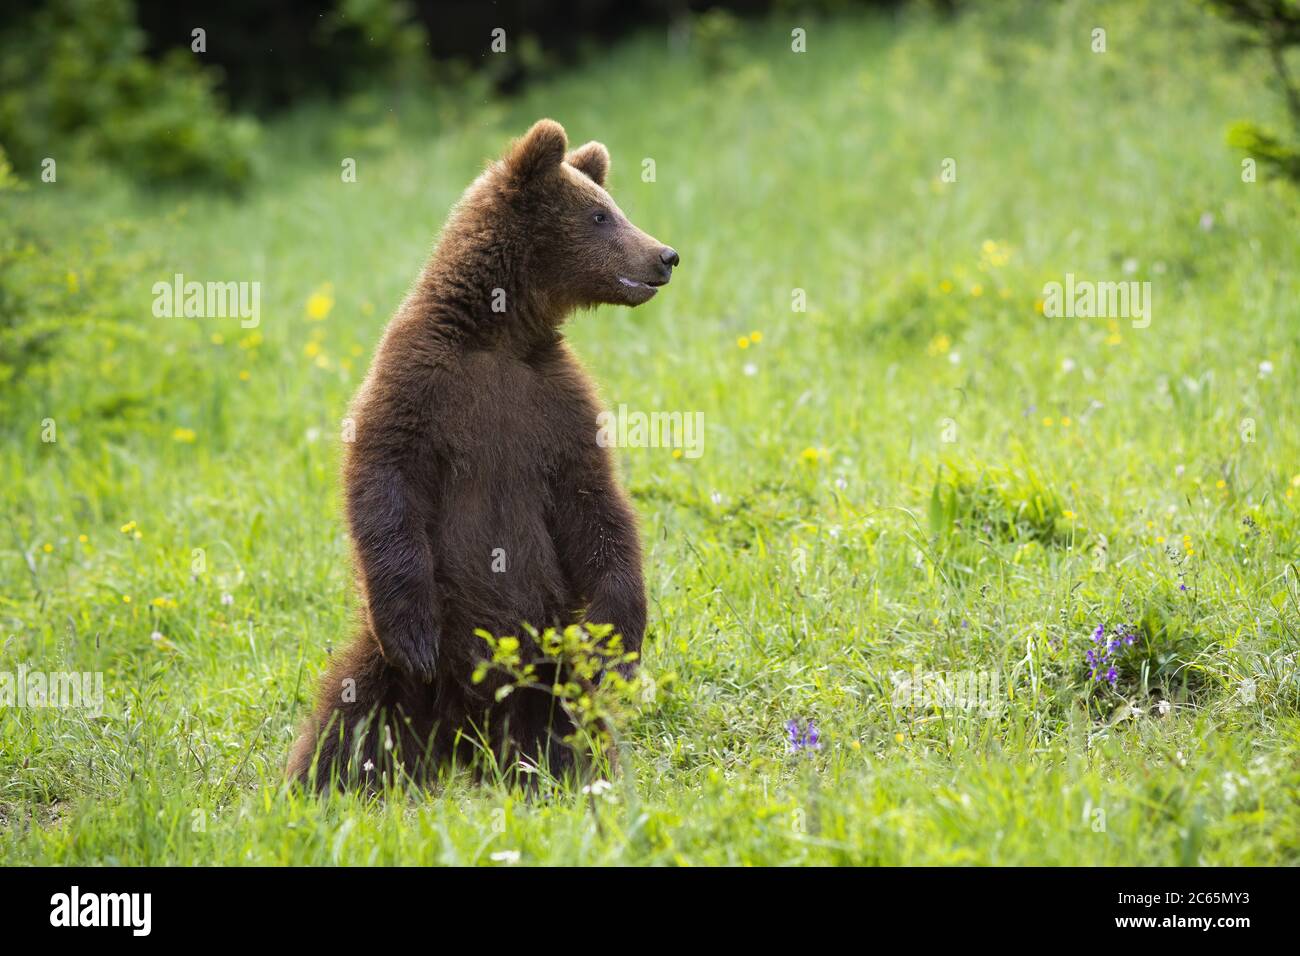 Juvenile brown bear standing on rear legs on meadow in summertime. Stock Photo